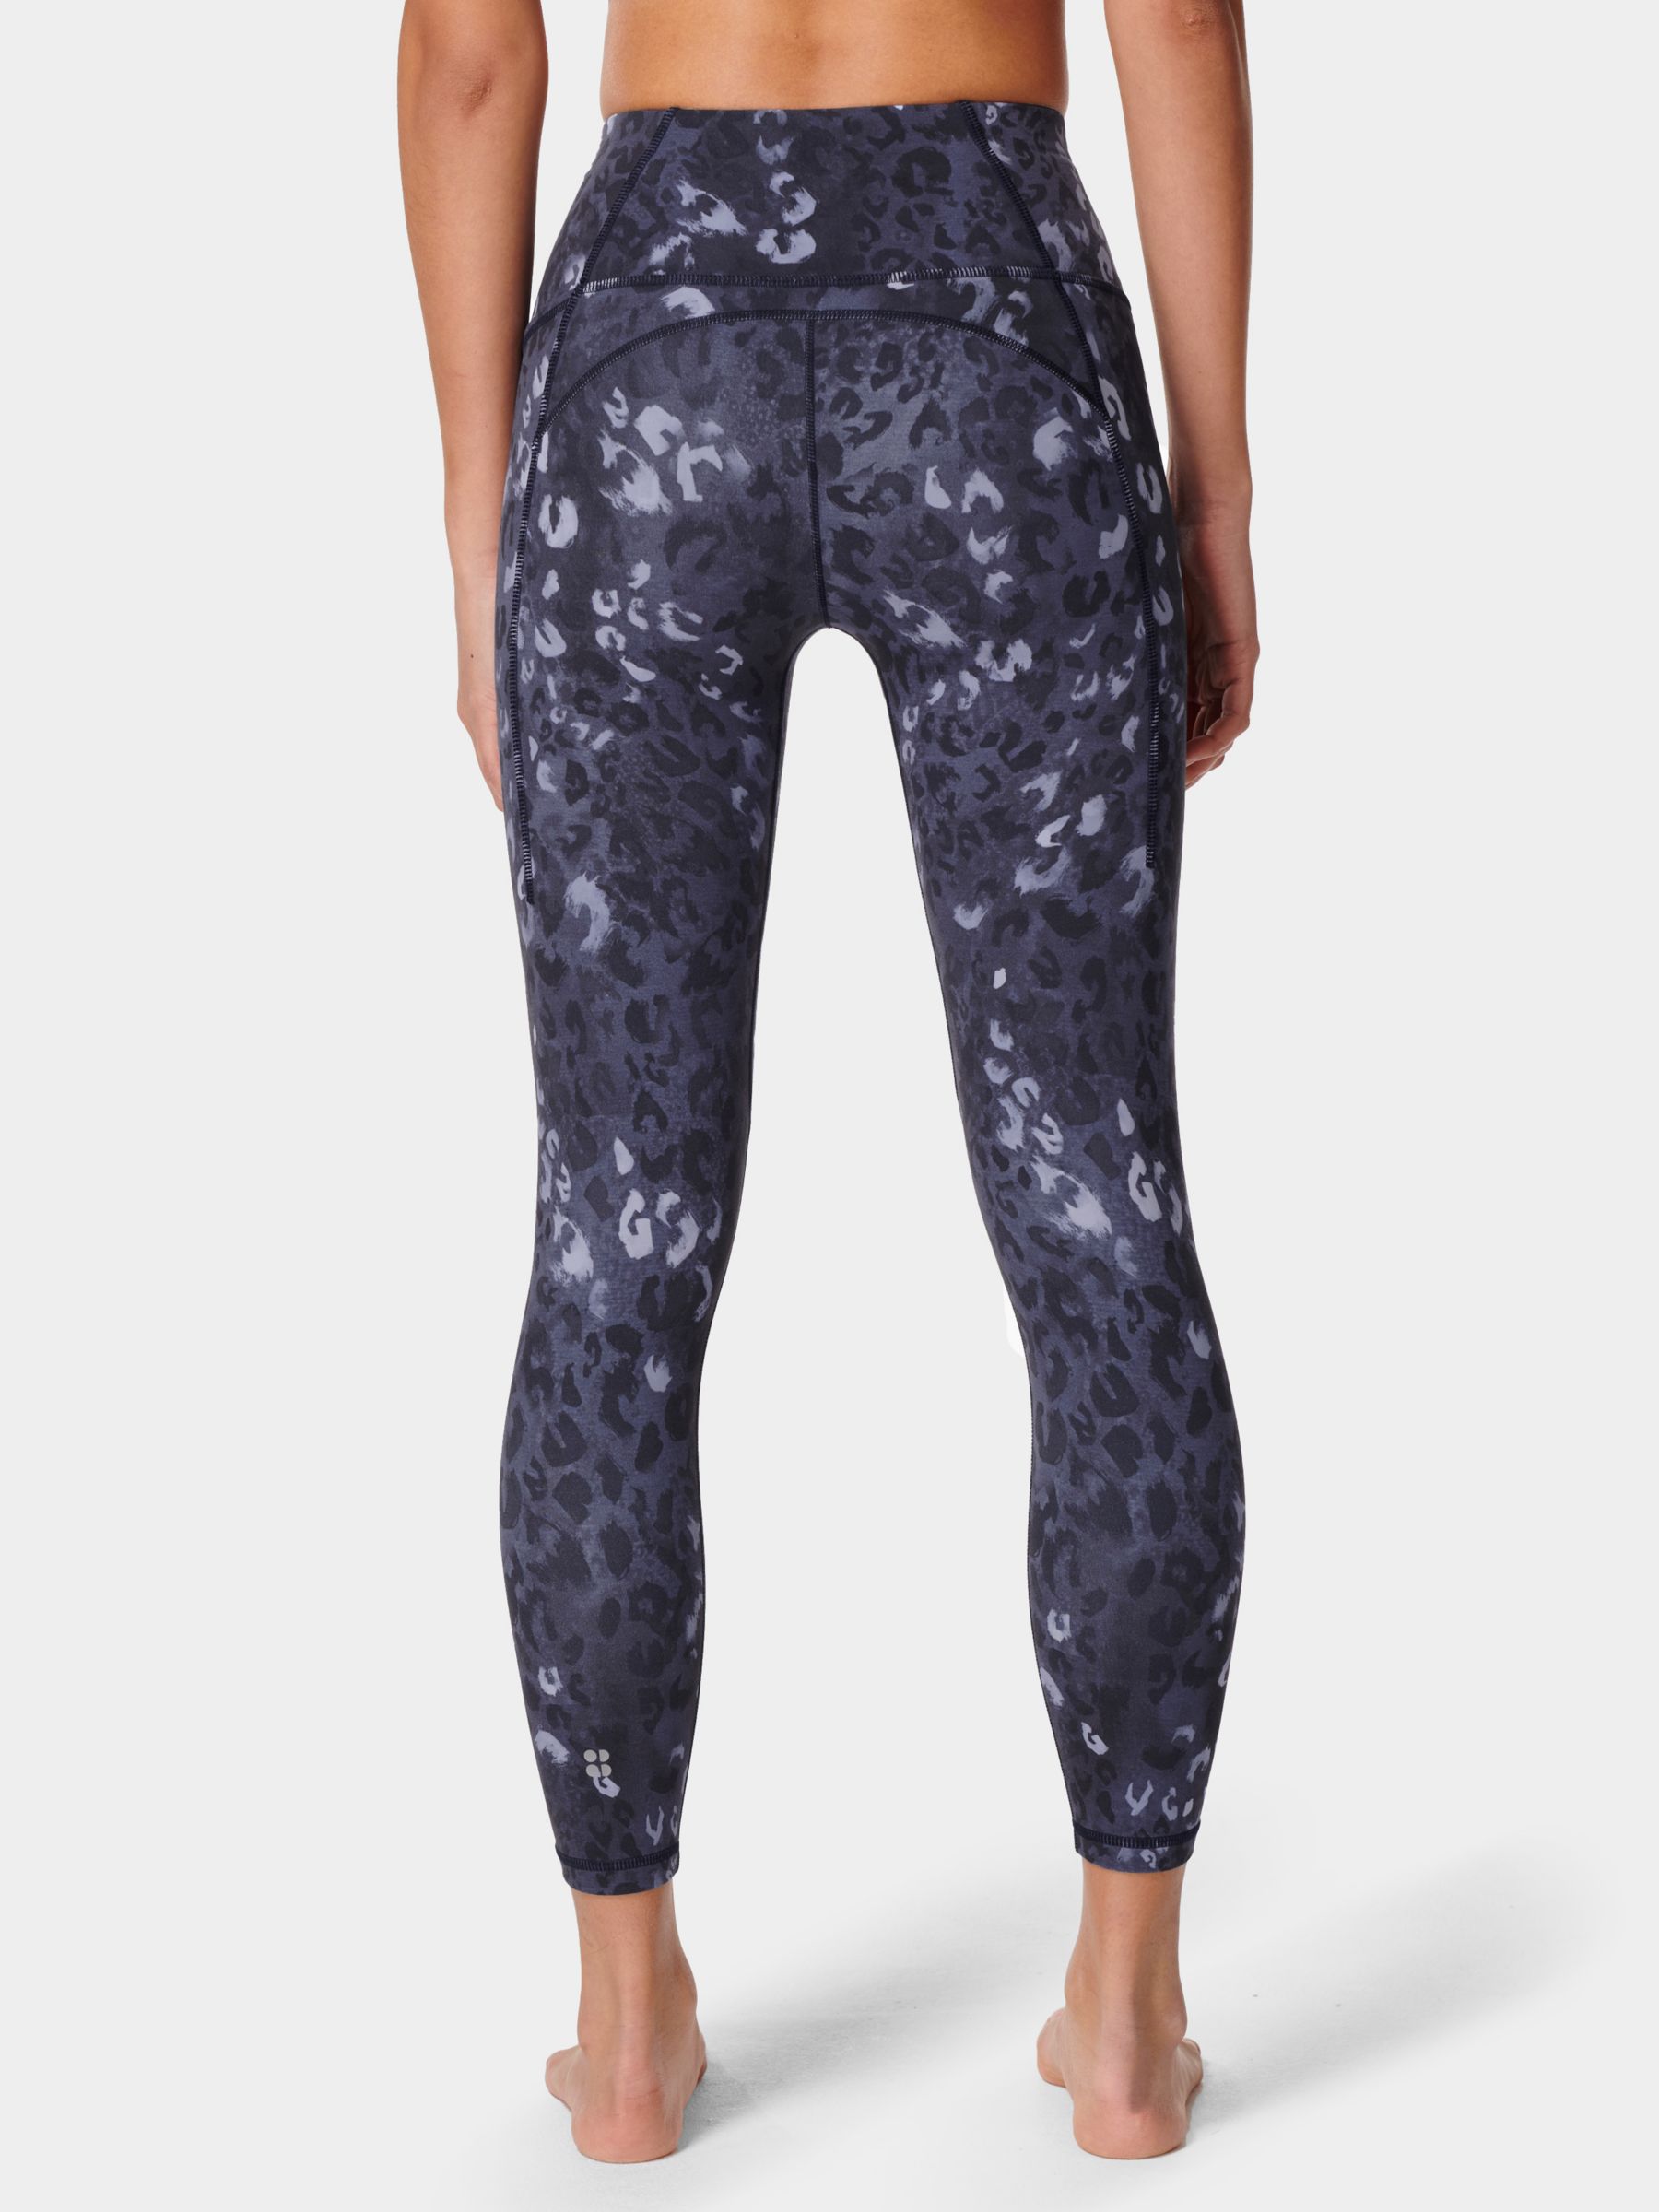 Fabletics Gray With Stars Leggings, Extra Large